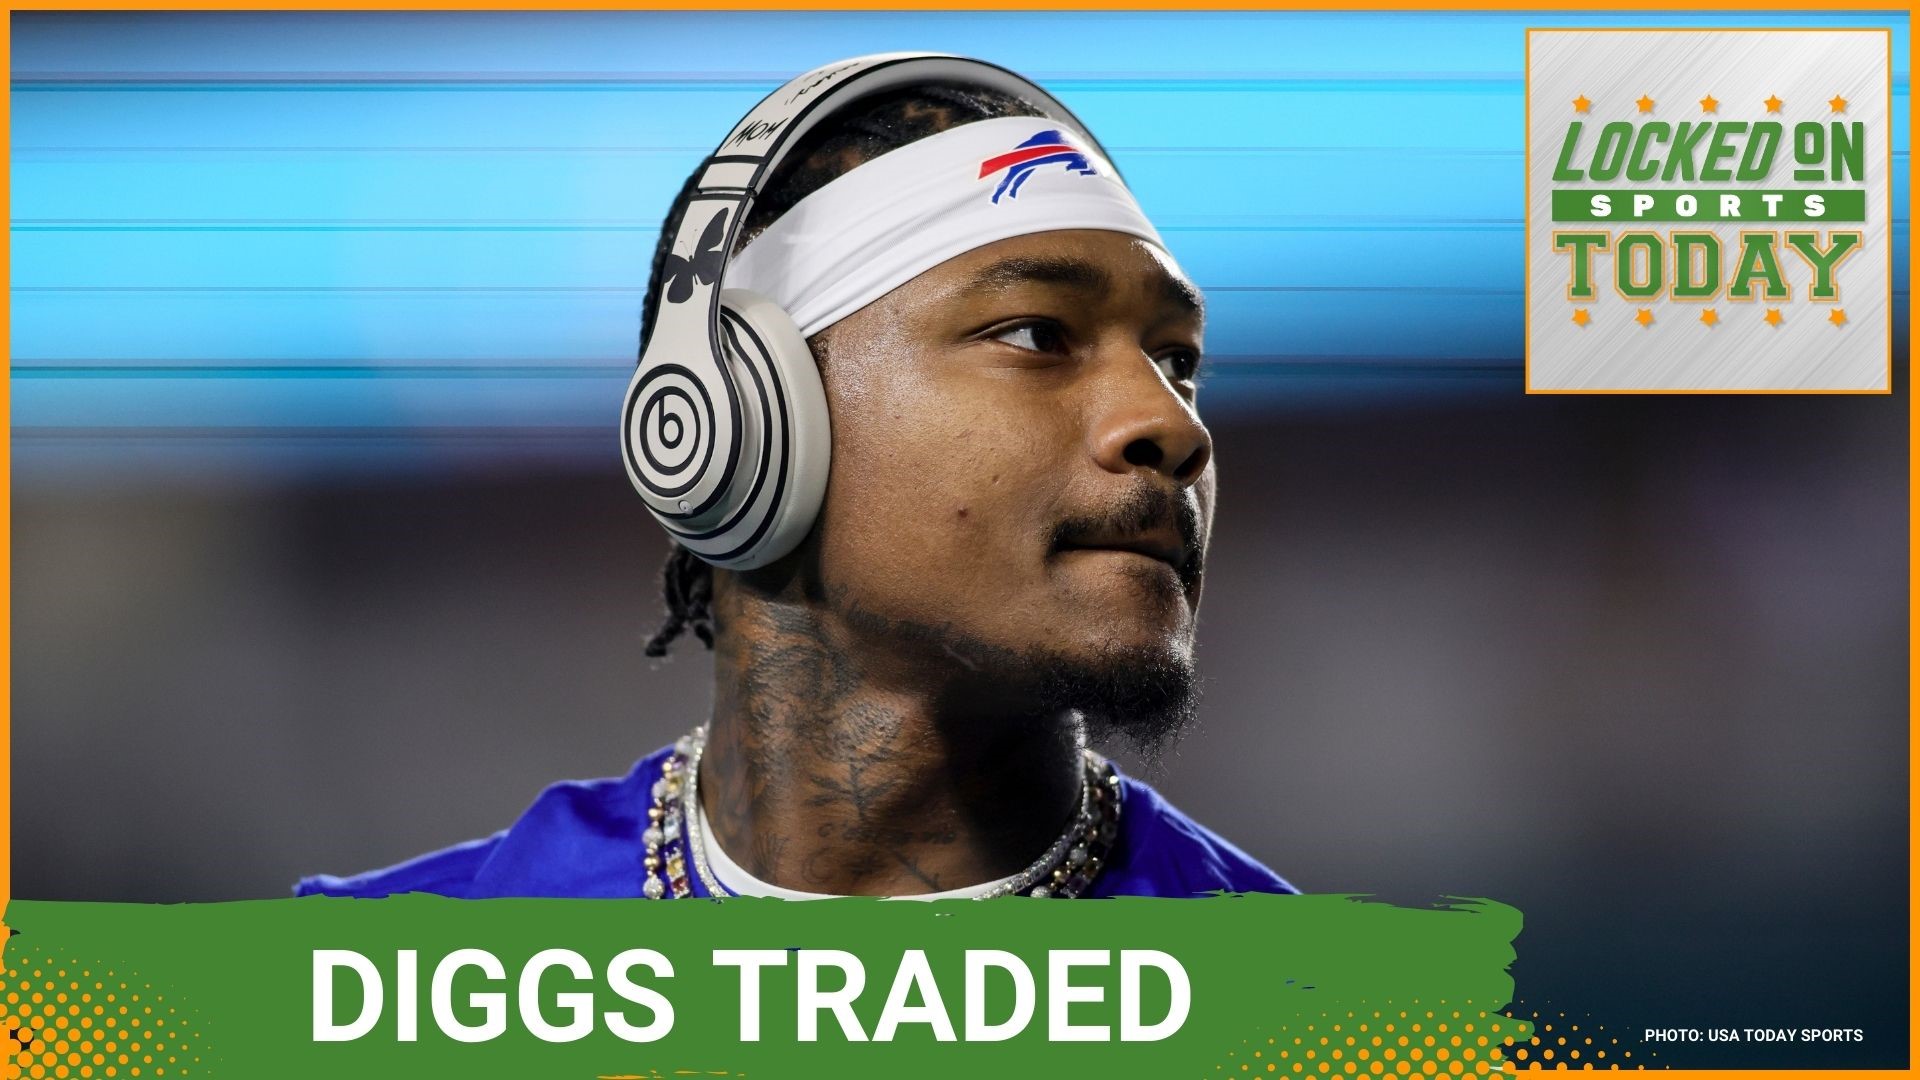 Discussing the day's top sports stories from the Stefon Diggs trade in the NFL to what's next for Buffalo and Josh Allen and the Yankees hot start.